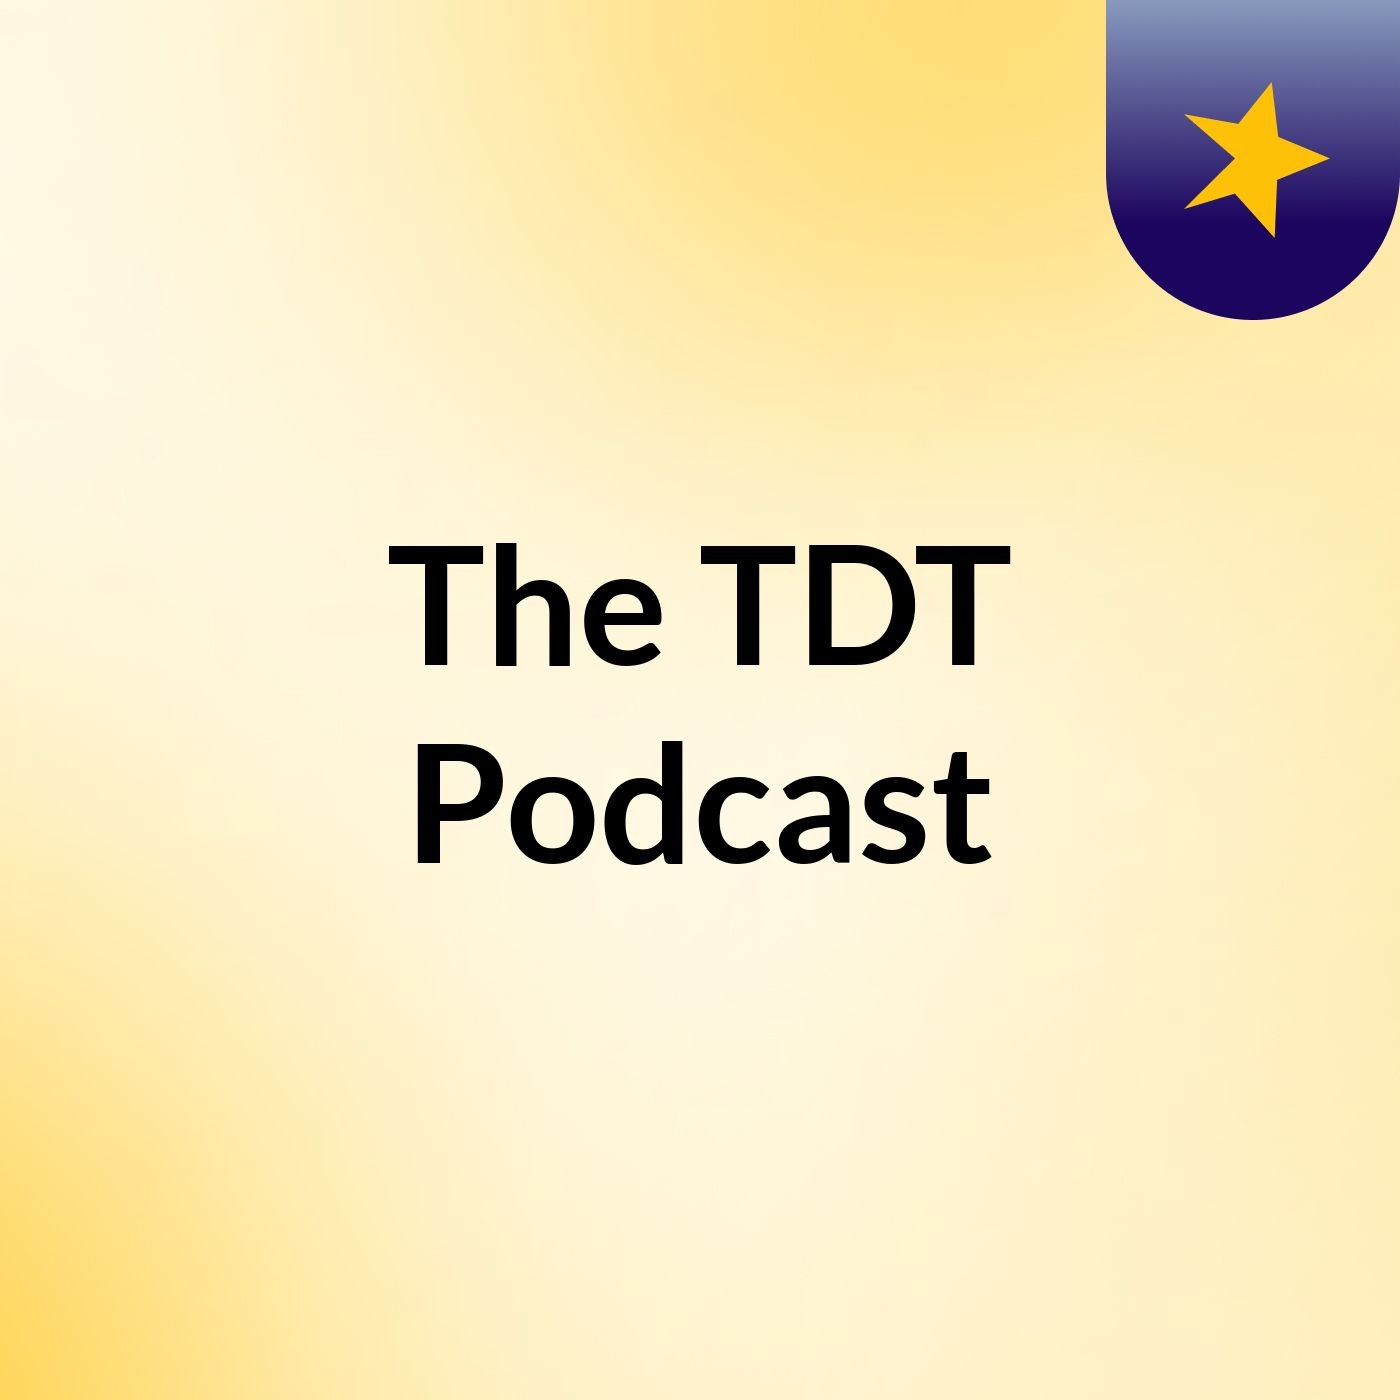 The TDT Podcast